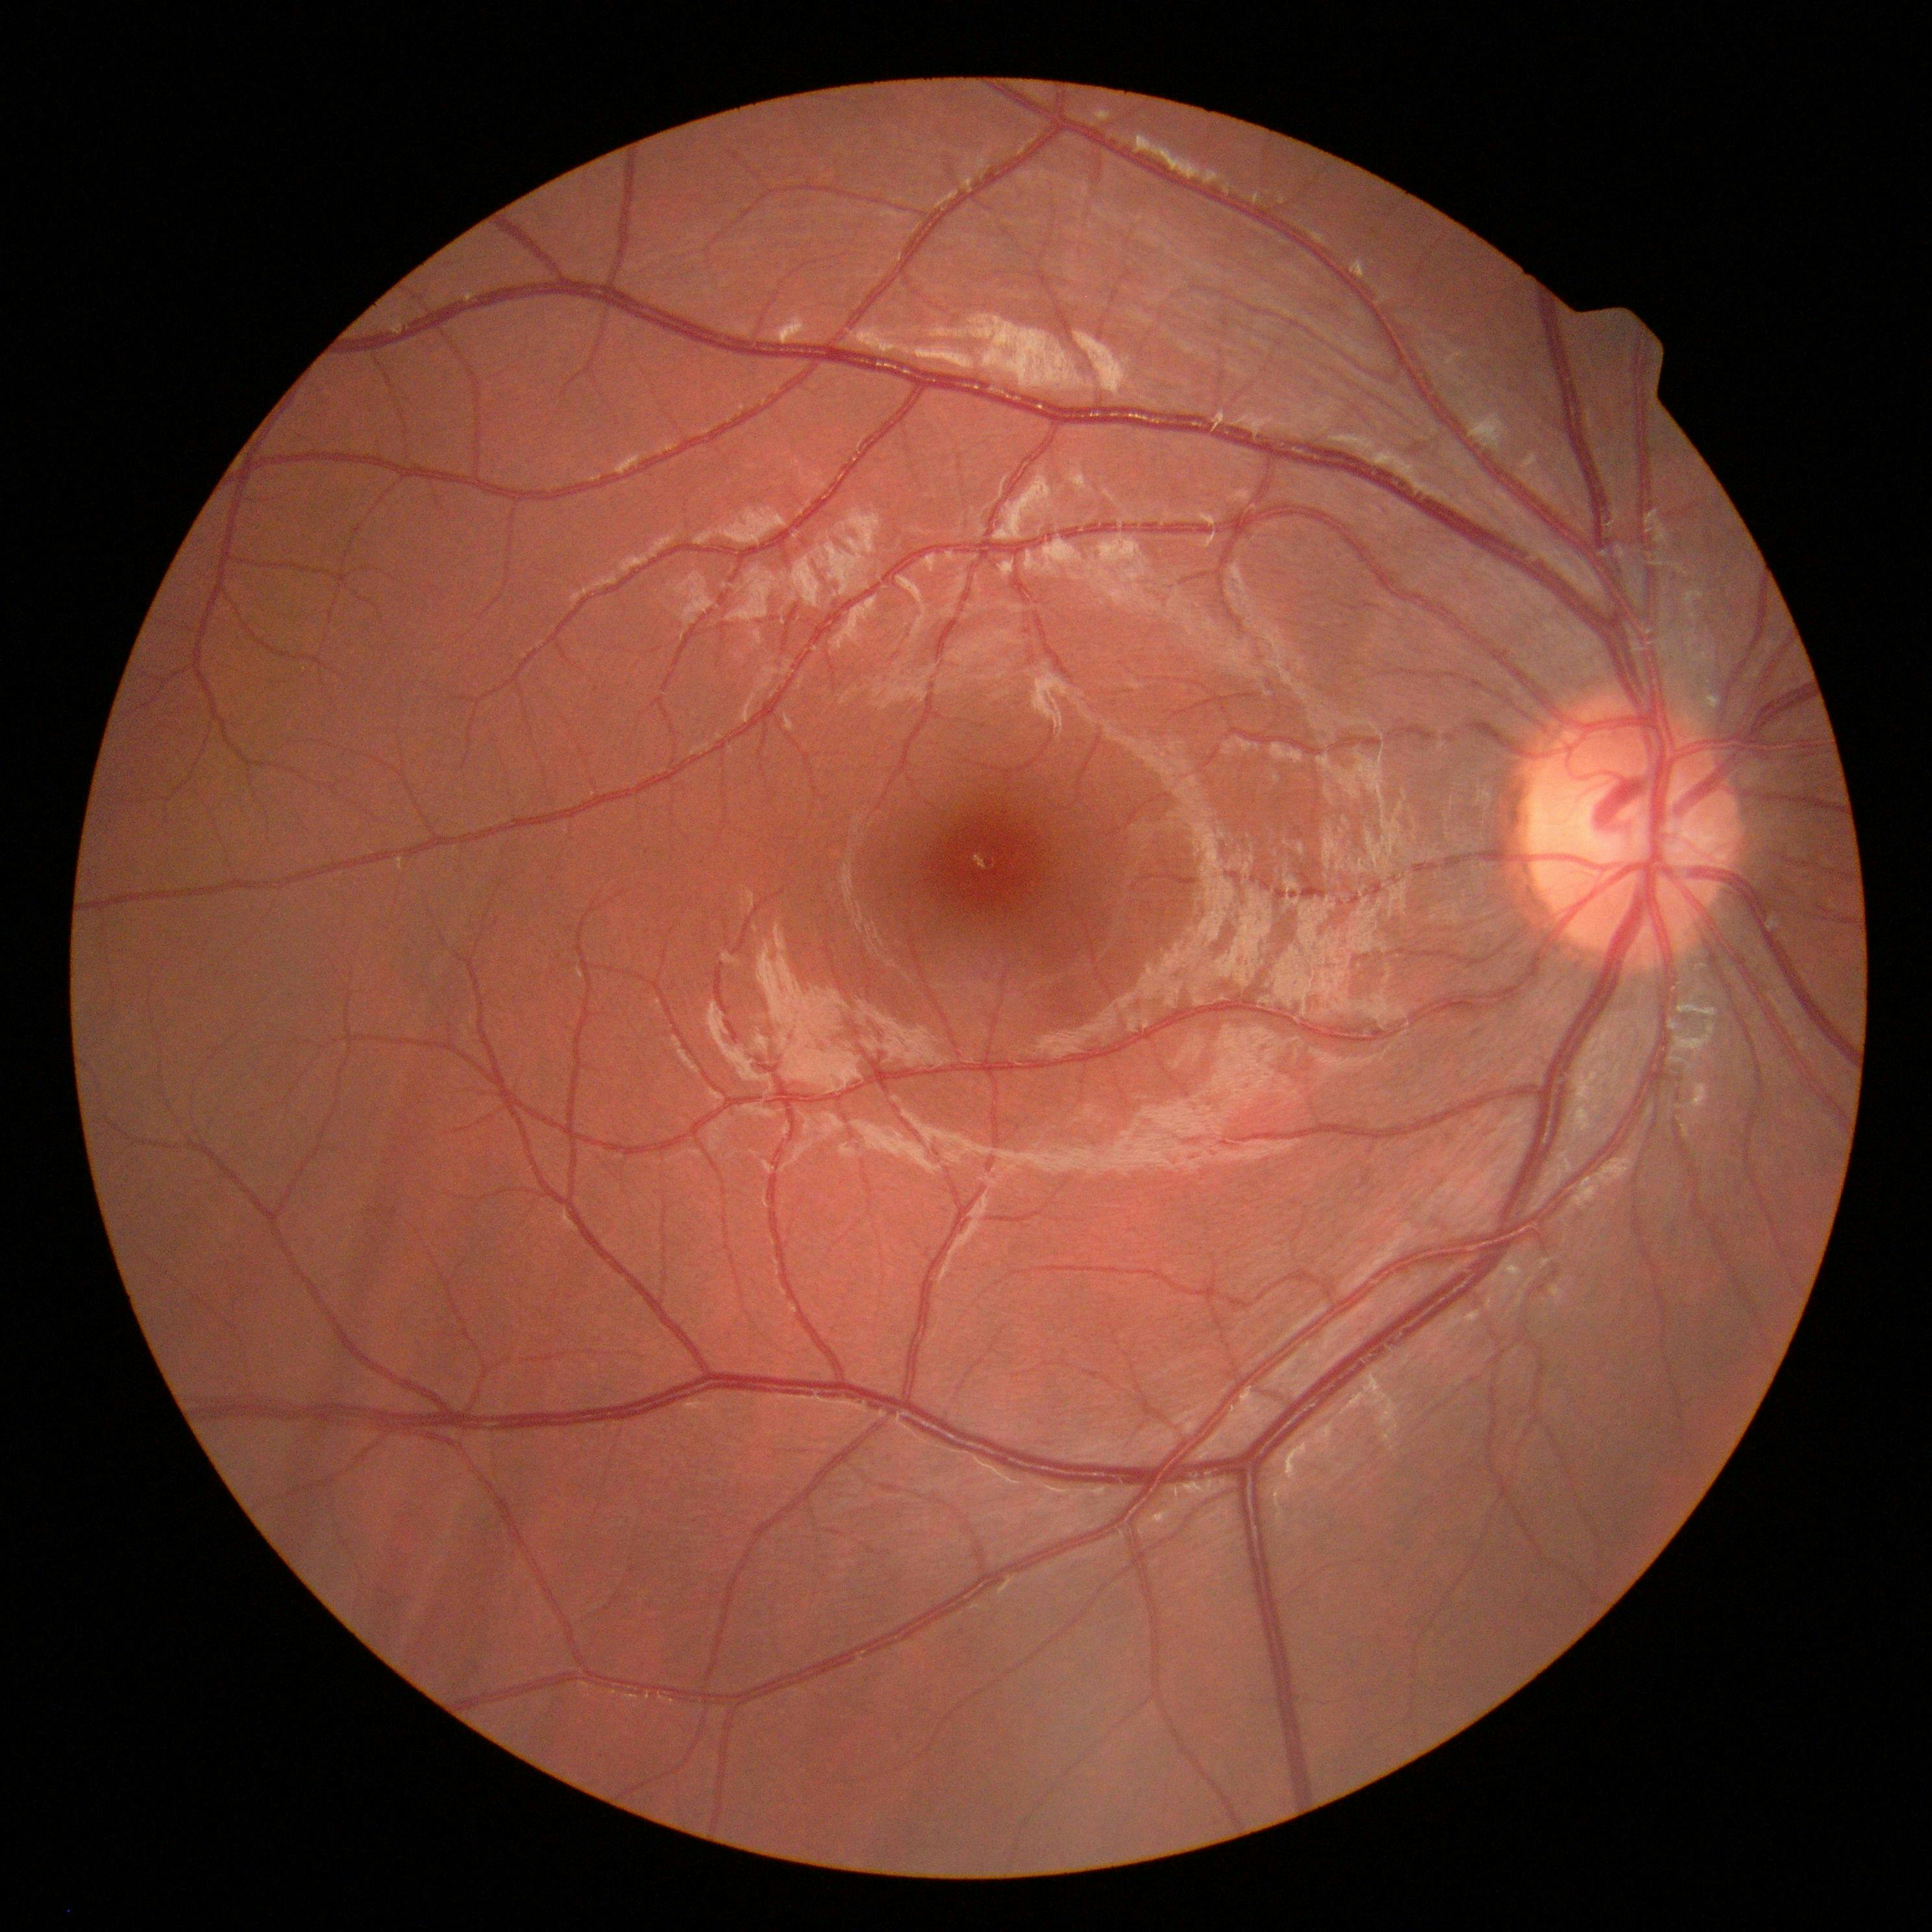 Gene Therapy for Diabetic Macular Edema Halted Following Serious Adverse Reaction 